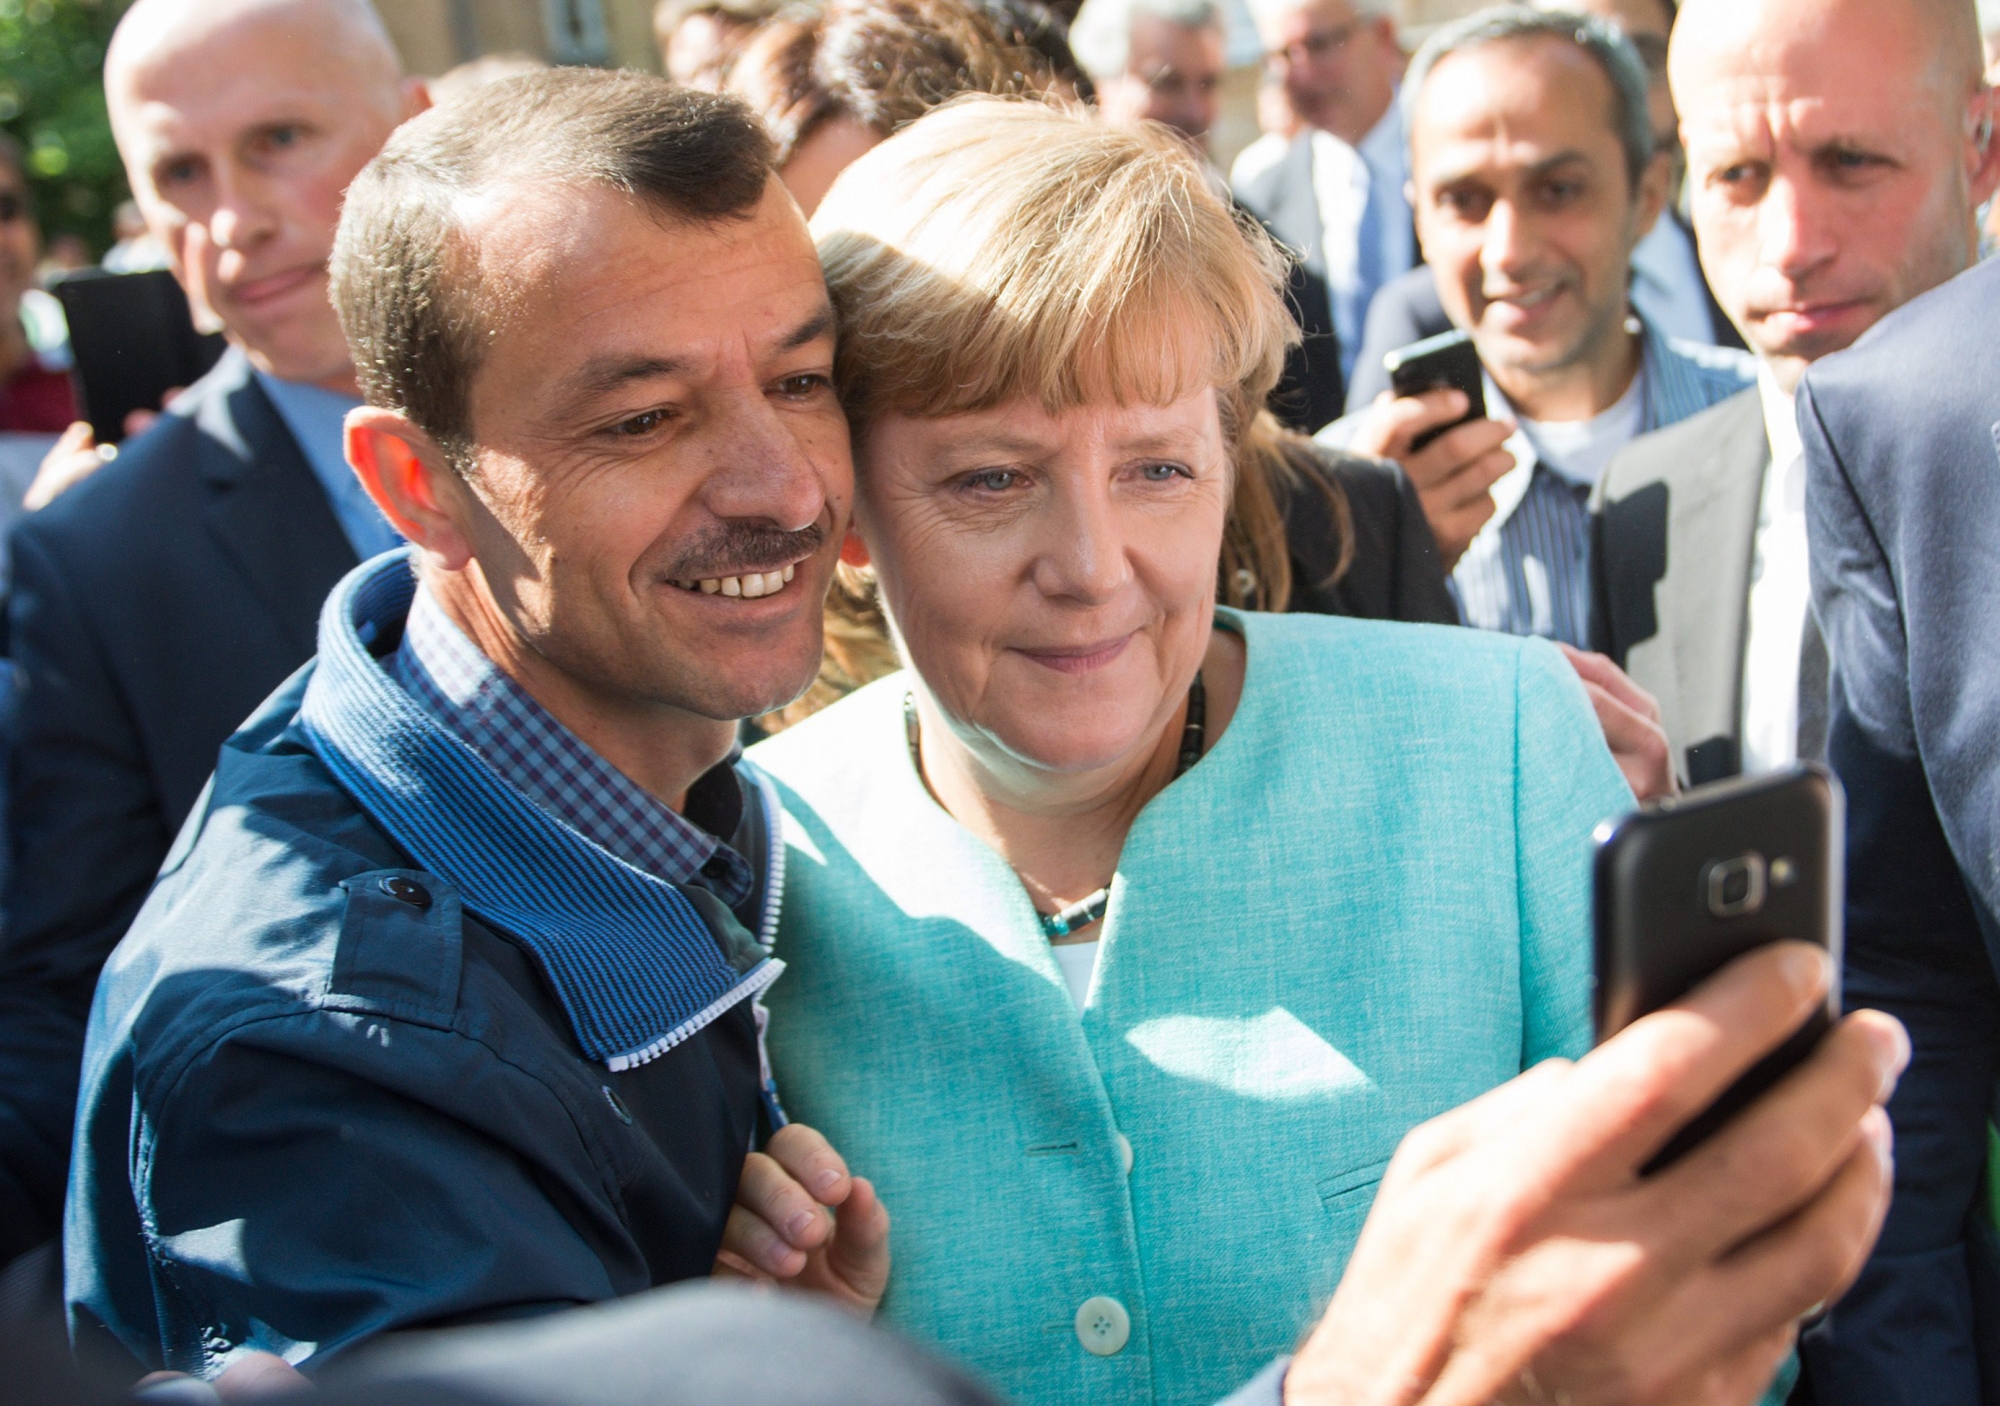 epa04923489 German Chancellor Angela Merkel (R) has a selfie taken with a refugee during a visit to a refugee reception centre in Berlin, Germany, 10 September 2015. Germany can deal with the arrival of hundreds of thousands of refugees without cutting social welfare benefits or raise taxes, Vice Chancellor Sigmar Gabriel said on 10 September, during a debate in parliament on next year's budget. Germany expects 800,000 asylum seekers this year, four times more than last year and more than any other country in the European Union, which is split on how to deal with the biggest refugee crisis since World War II.  EPA/BERND VON JUTRCZENKA DEUTSCHLAND MIGRATION